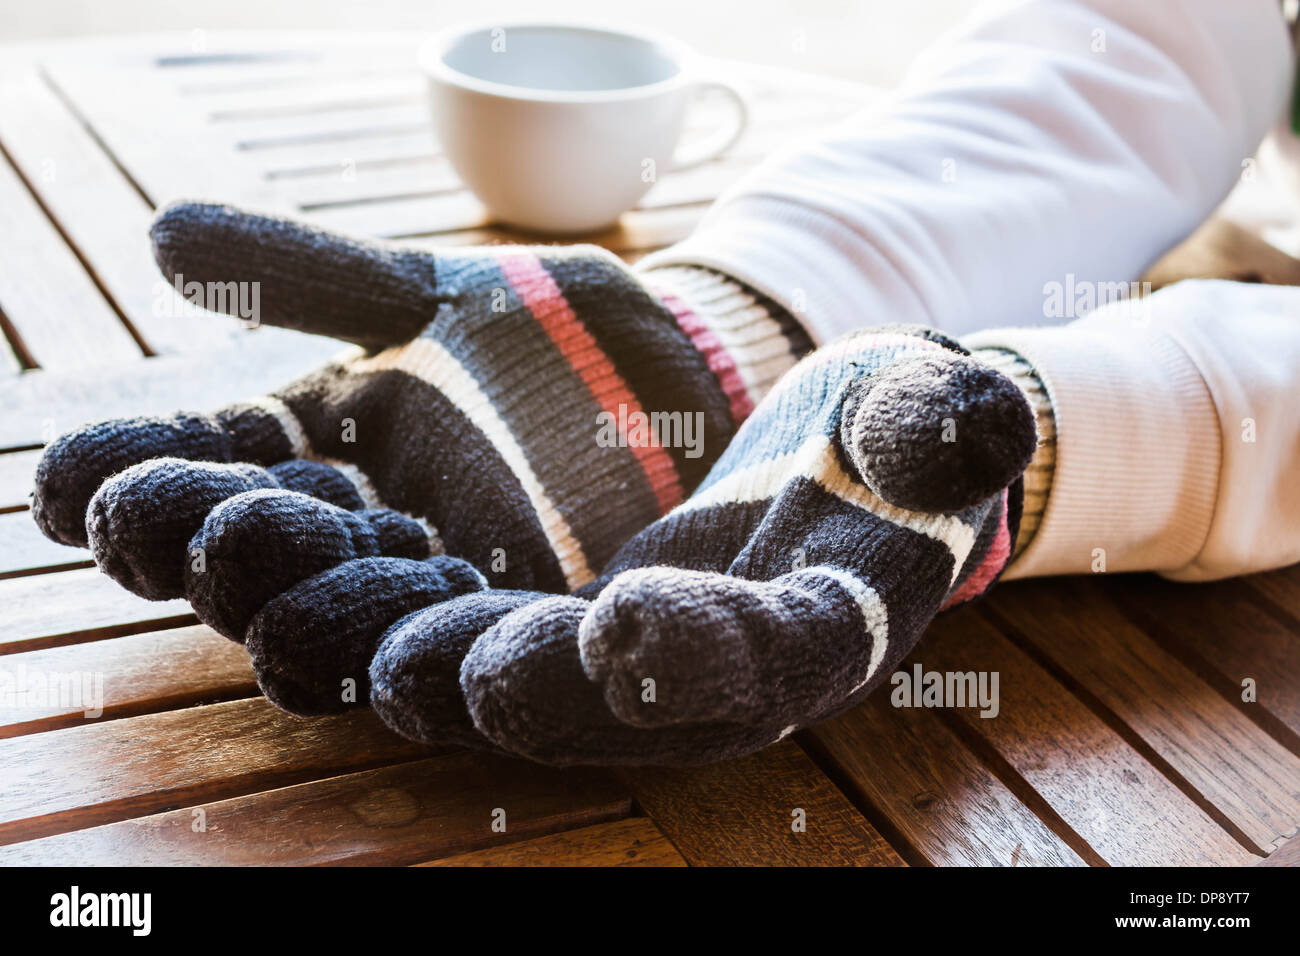 Warmly hands in wool gloves, stock photo Stock Photo